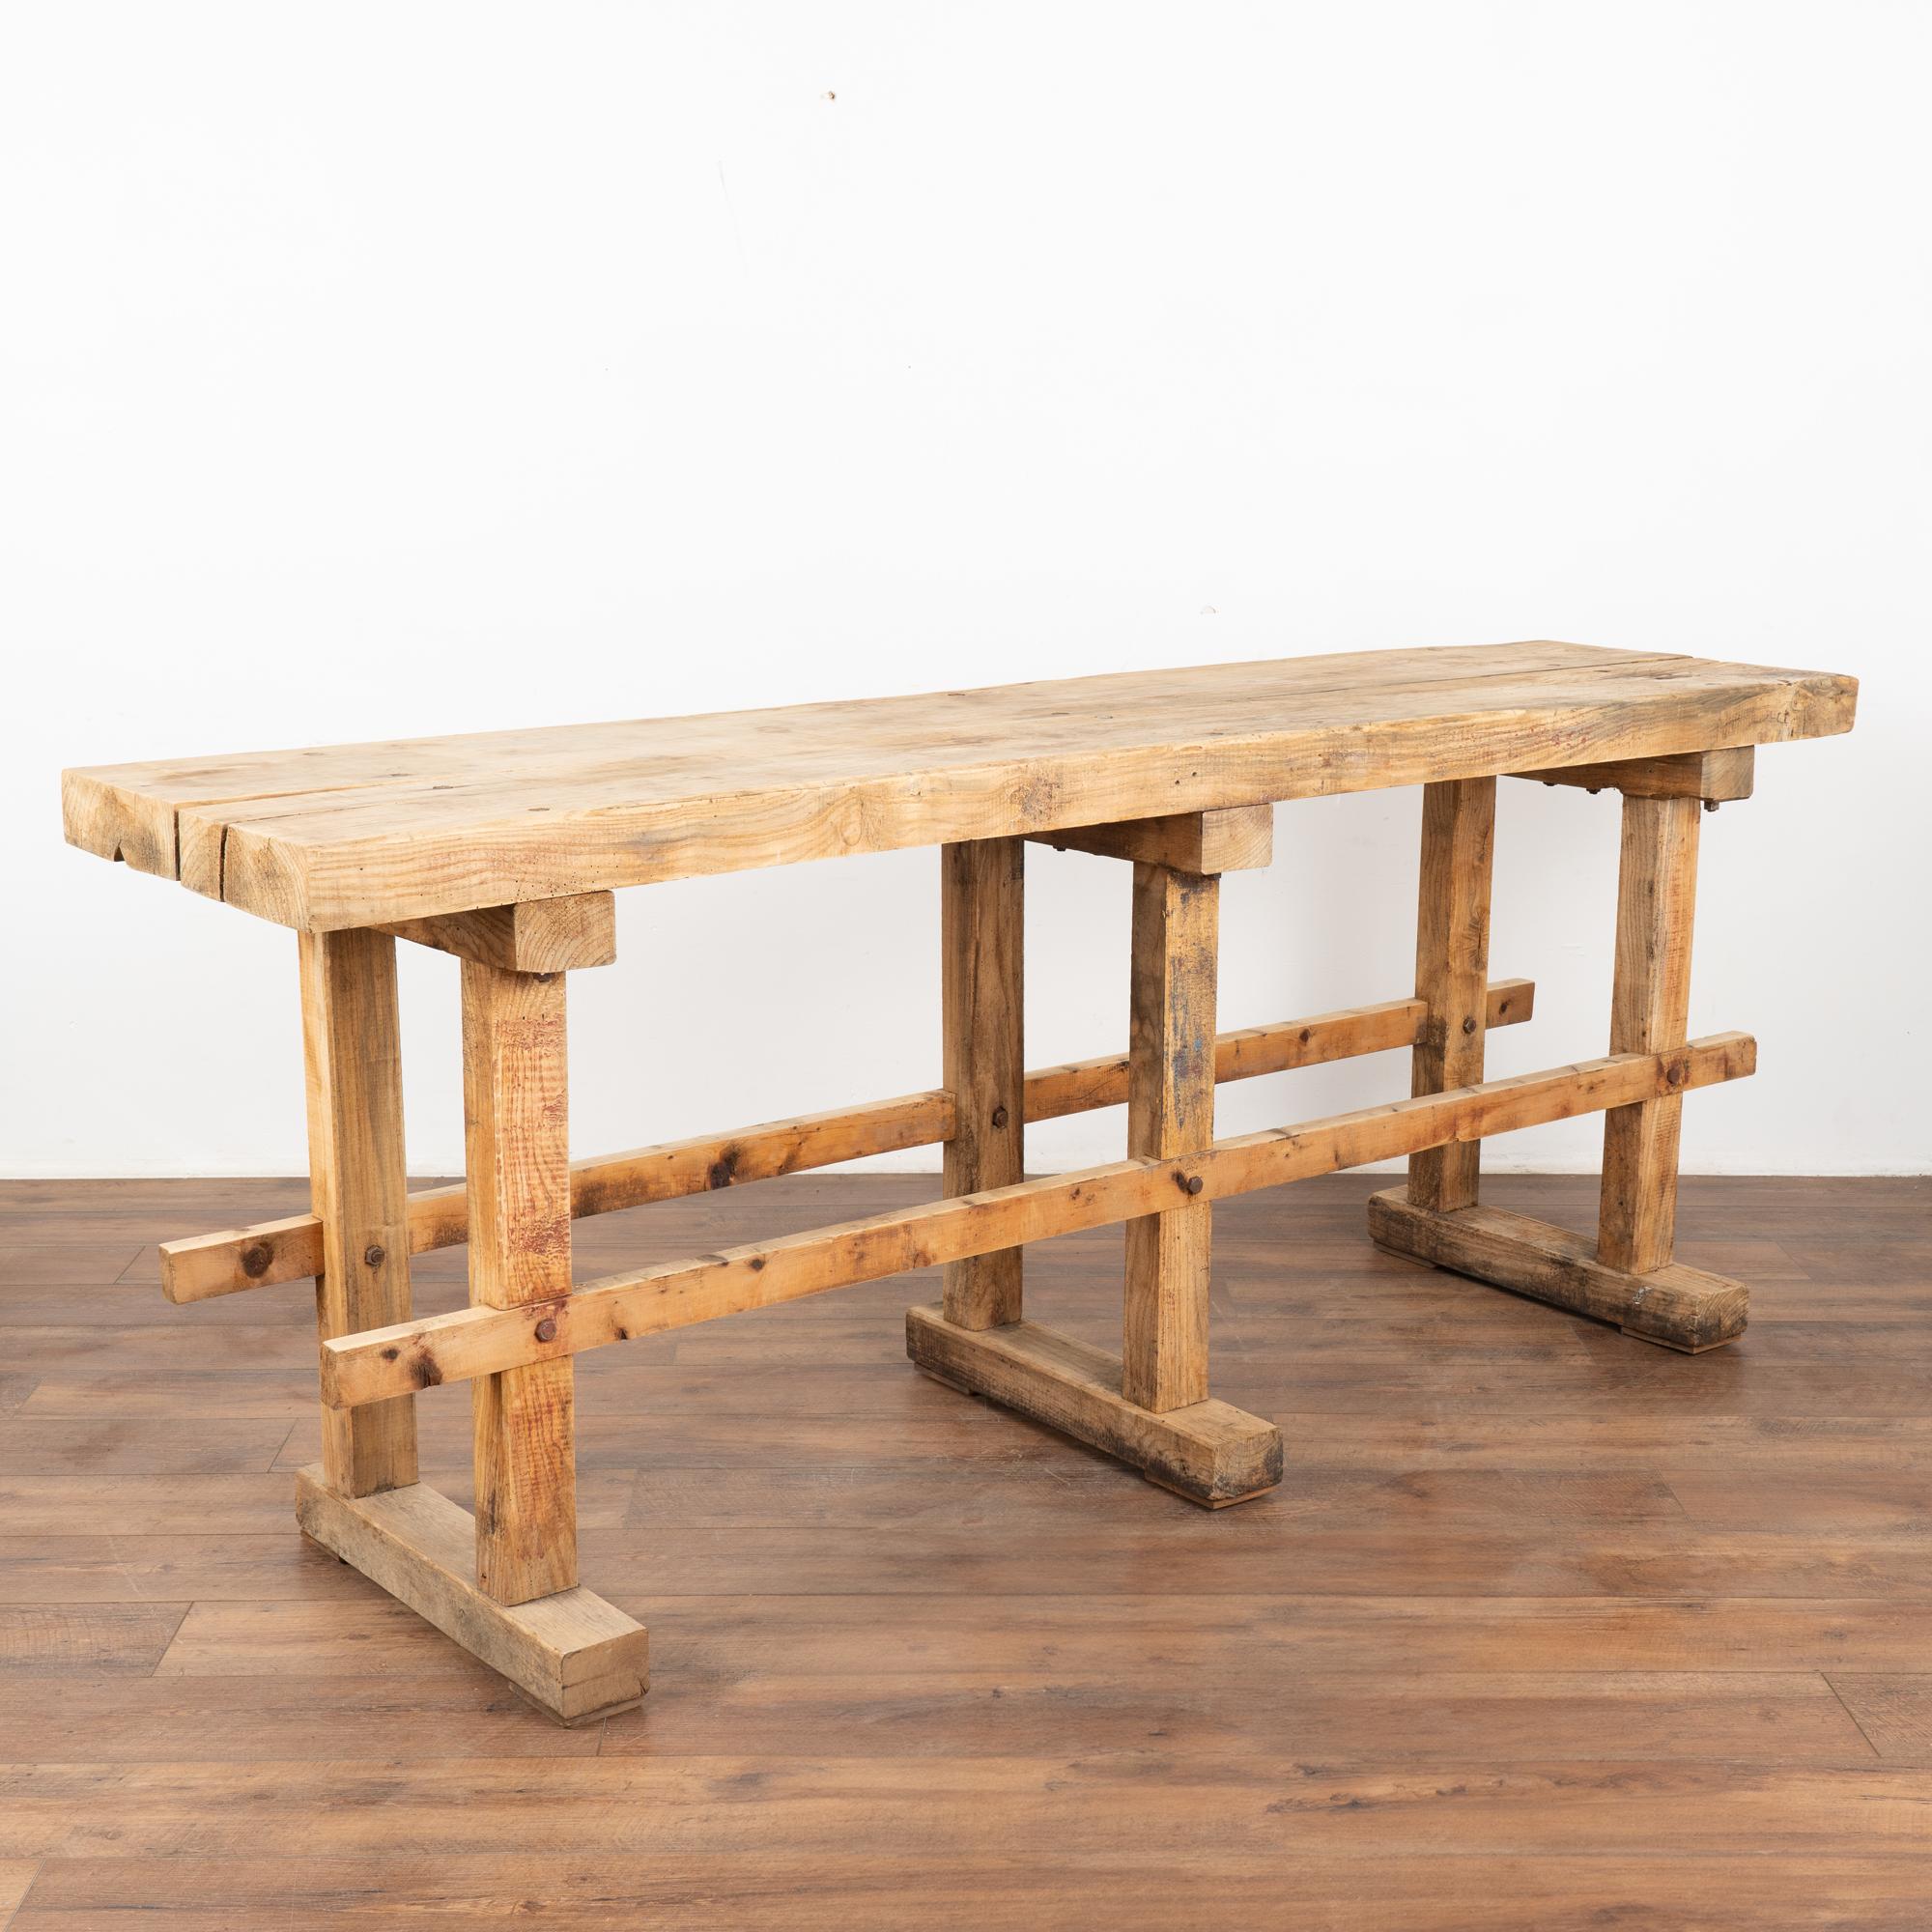 The strong appeal of this rustic console table comes from the well worn top reflecting generations of use.
It originally served as a work table, resulting in the worn patina with deep gouges, cracks, scrapes, stains, and old gnarls.
This console